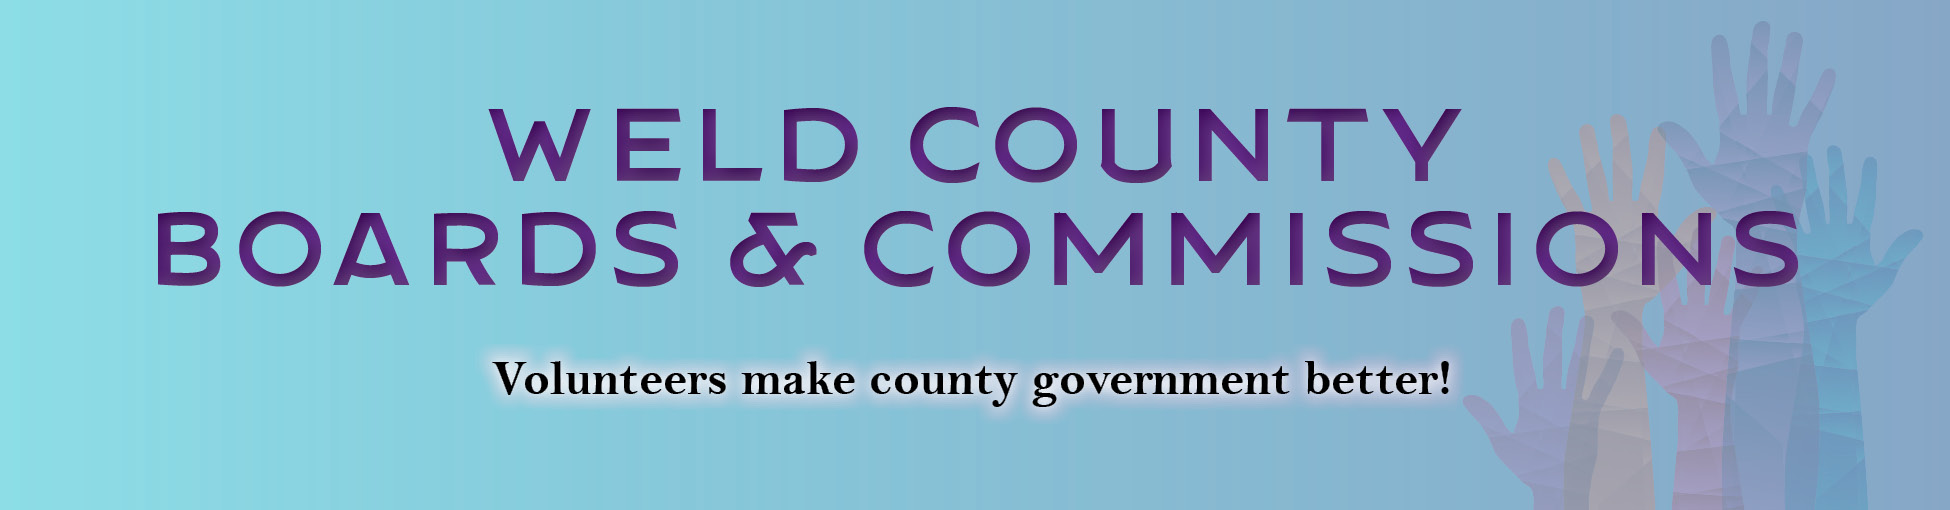 Weld County boards and commissions. Volunteers make county government better